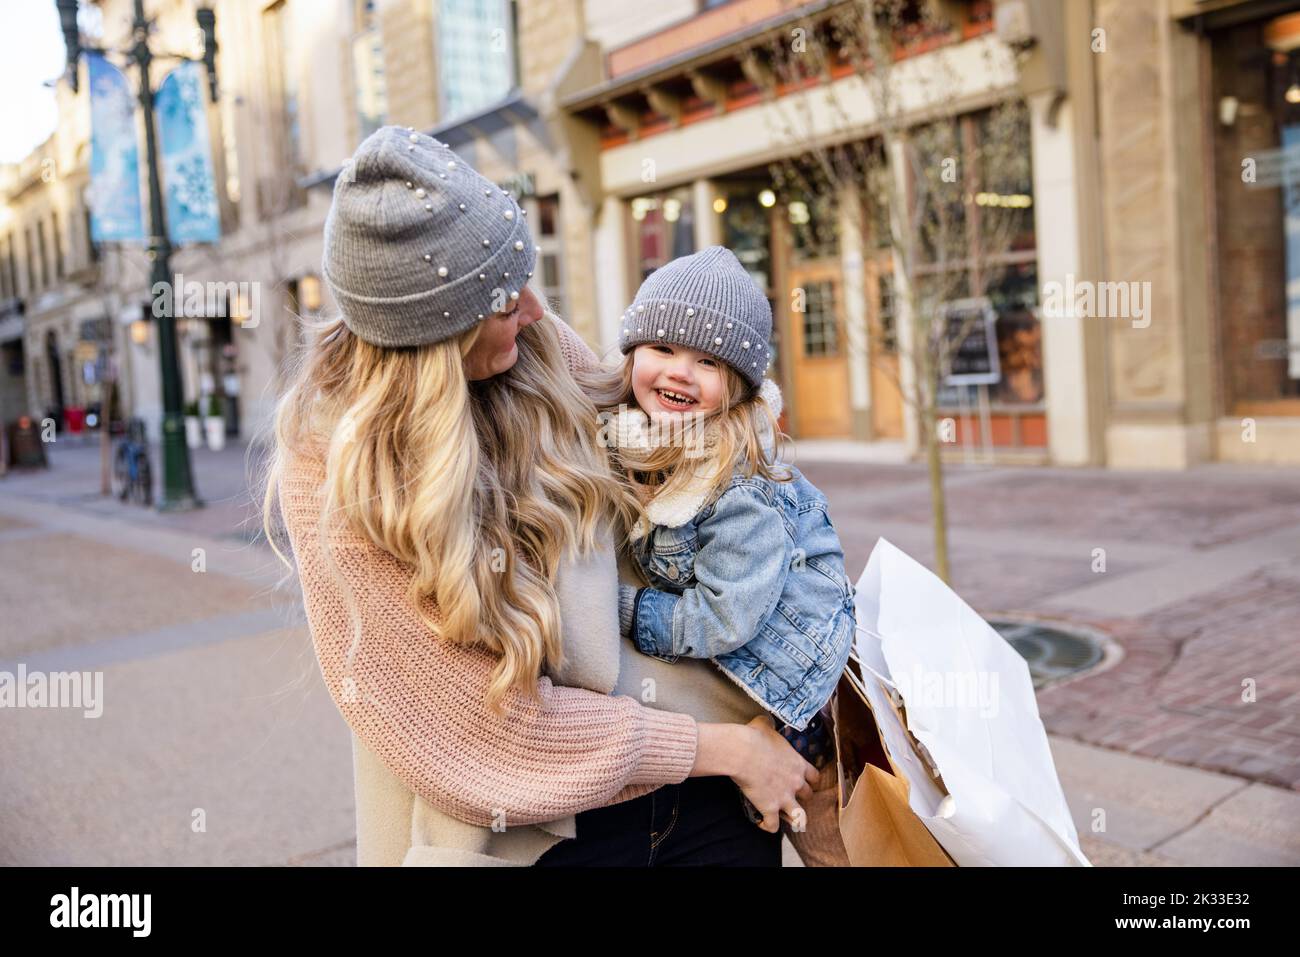 Portrait happy blonde mother and daughter in knit hats on city street Stock Photo